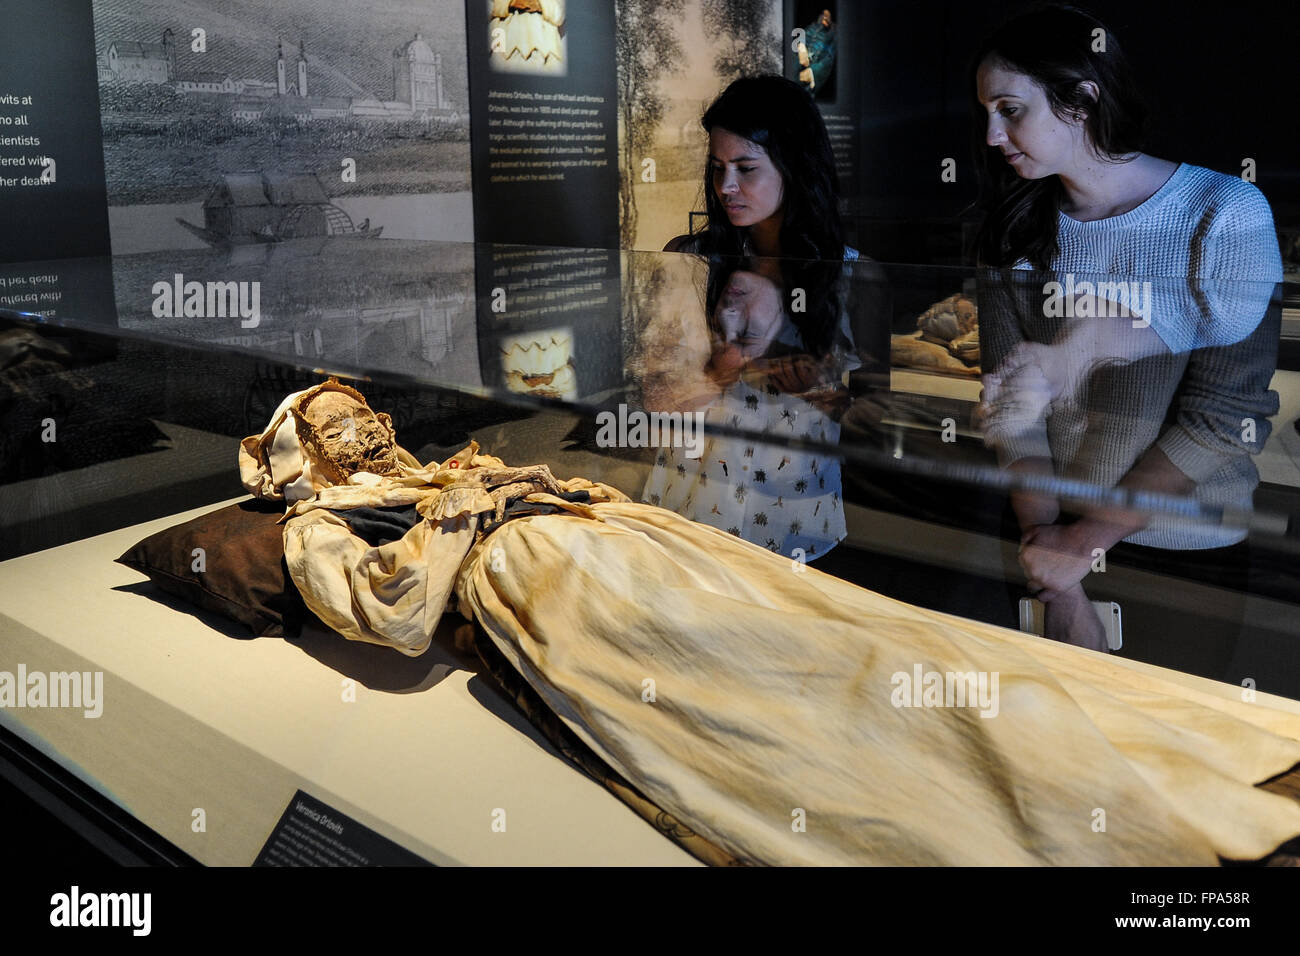 Los Angeles, California, USA. 17th March, 2016. Photo taken on March 17, 2016 shows a female mummy displayed during the preview of the "Mummies of the World: The Exhibition" held at the Bowers Museum, California, the United States. The exhibition, featuring more than 150 artifacts, real human and animal mummies from across the globe, will kick off on March 18. © Zhang Chaoqun/Xinhua/Alamy Live News Stock Photo